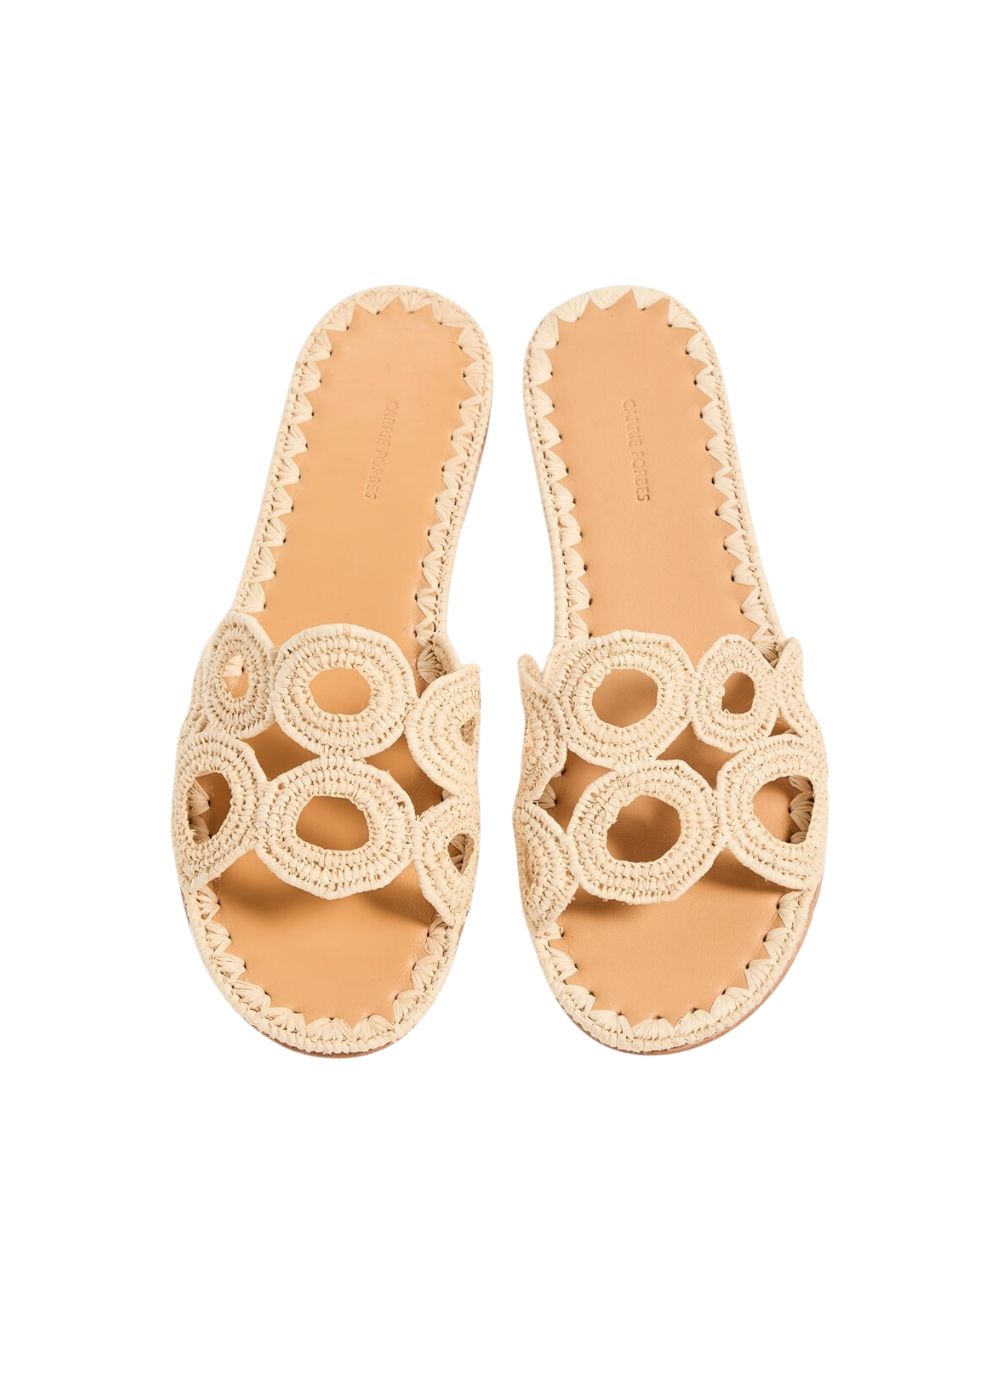 Carrie forbes lou lou sandals,natural raffia - J. Cathell